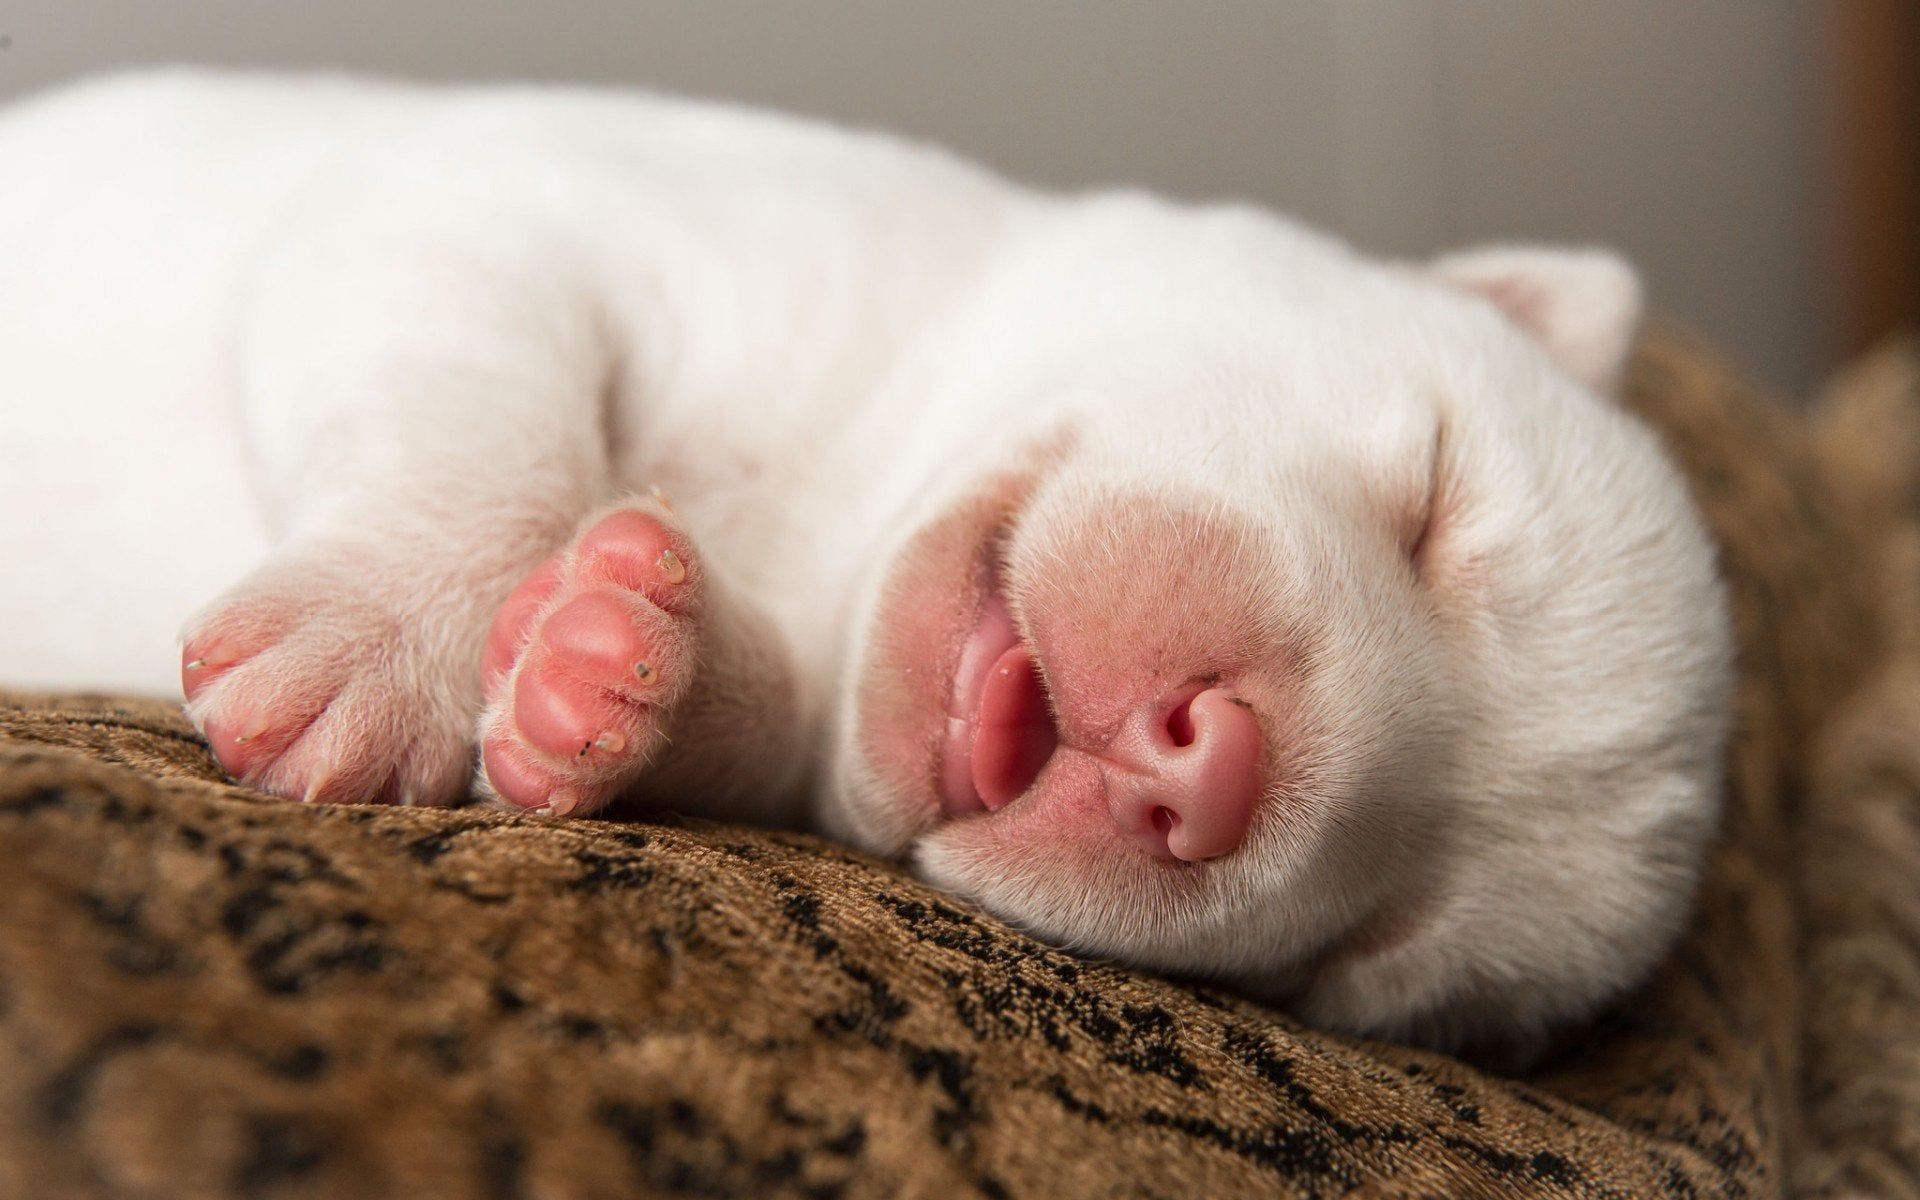 Cute Sleeping Puppy Wallpapers - Wallpaper Cave